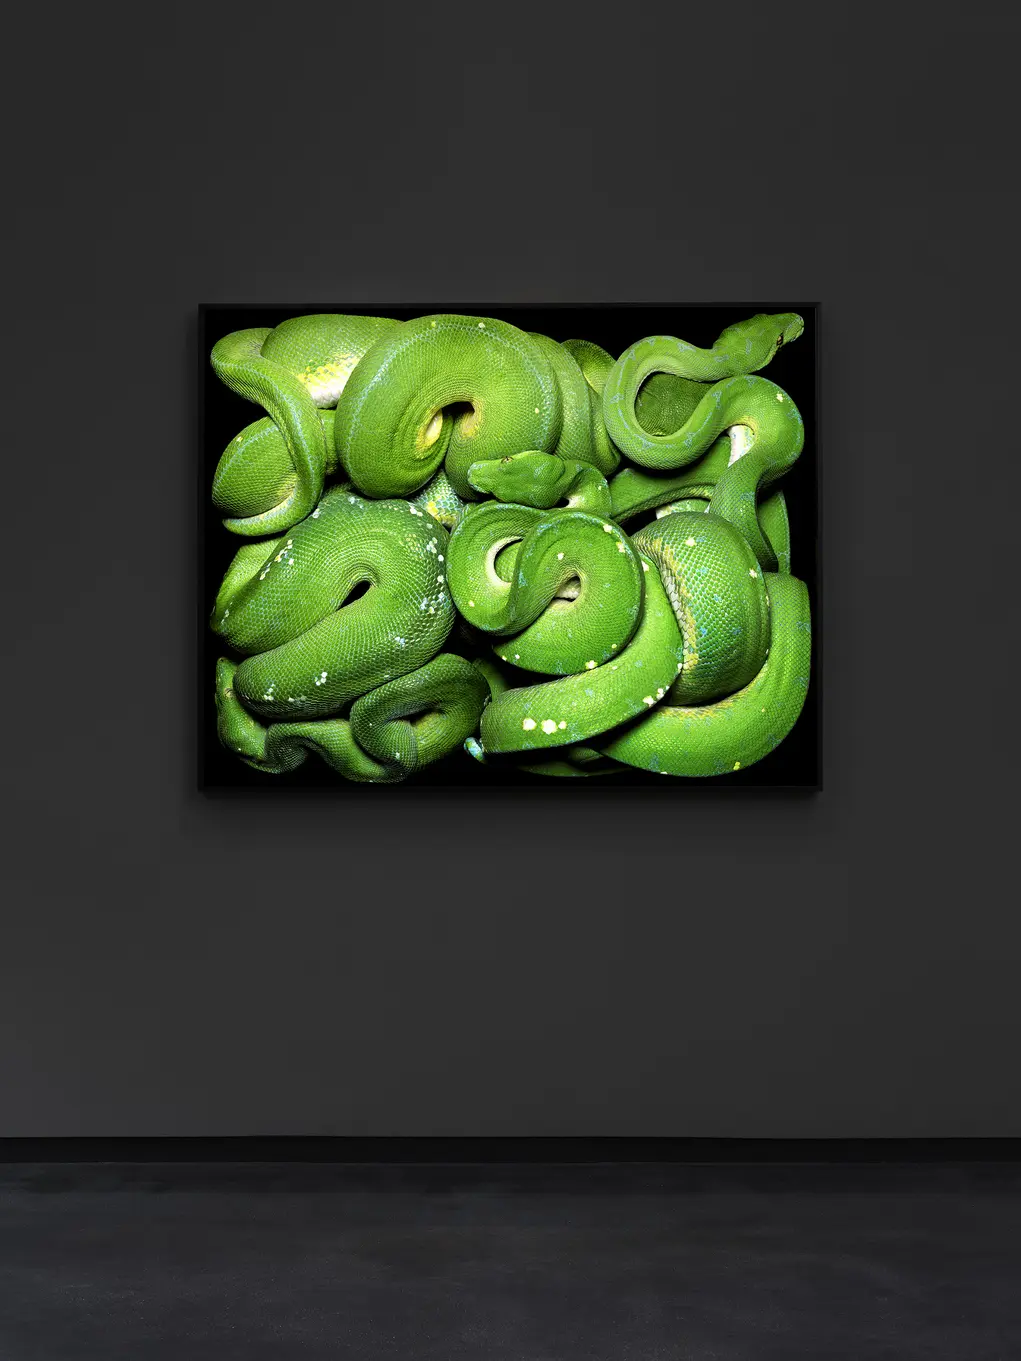 Snakes on canvas